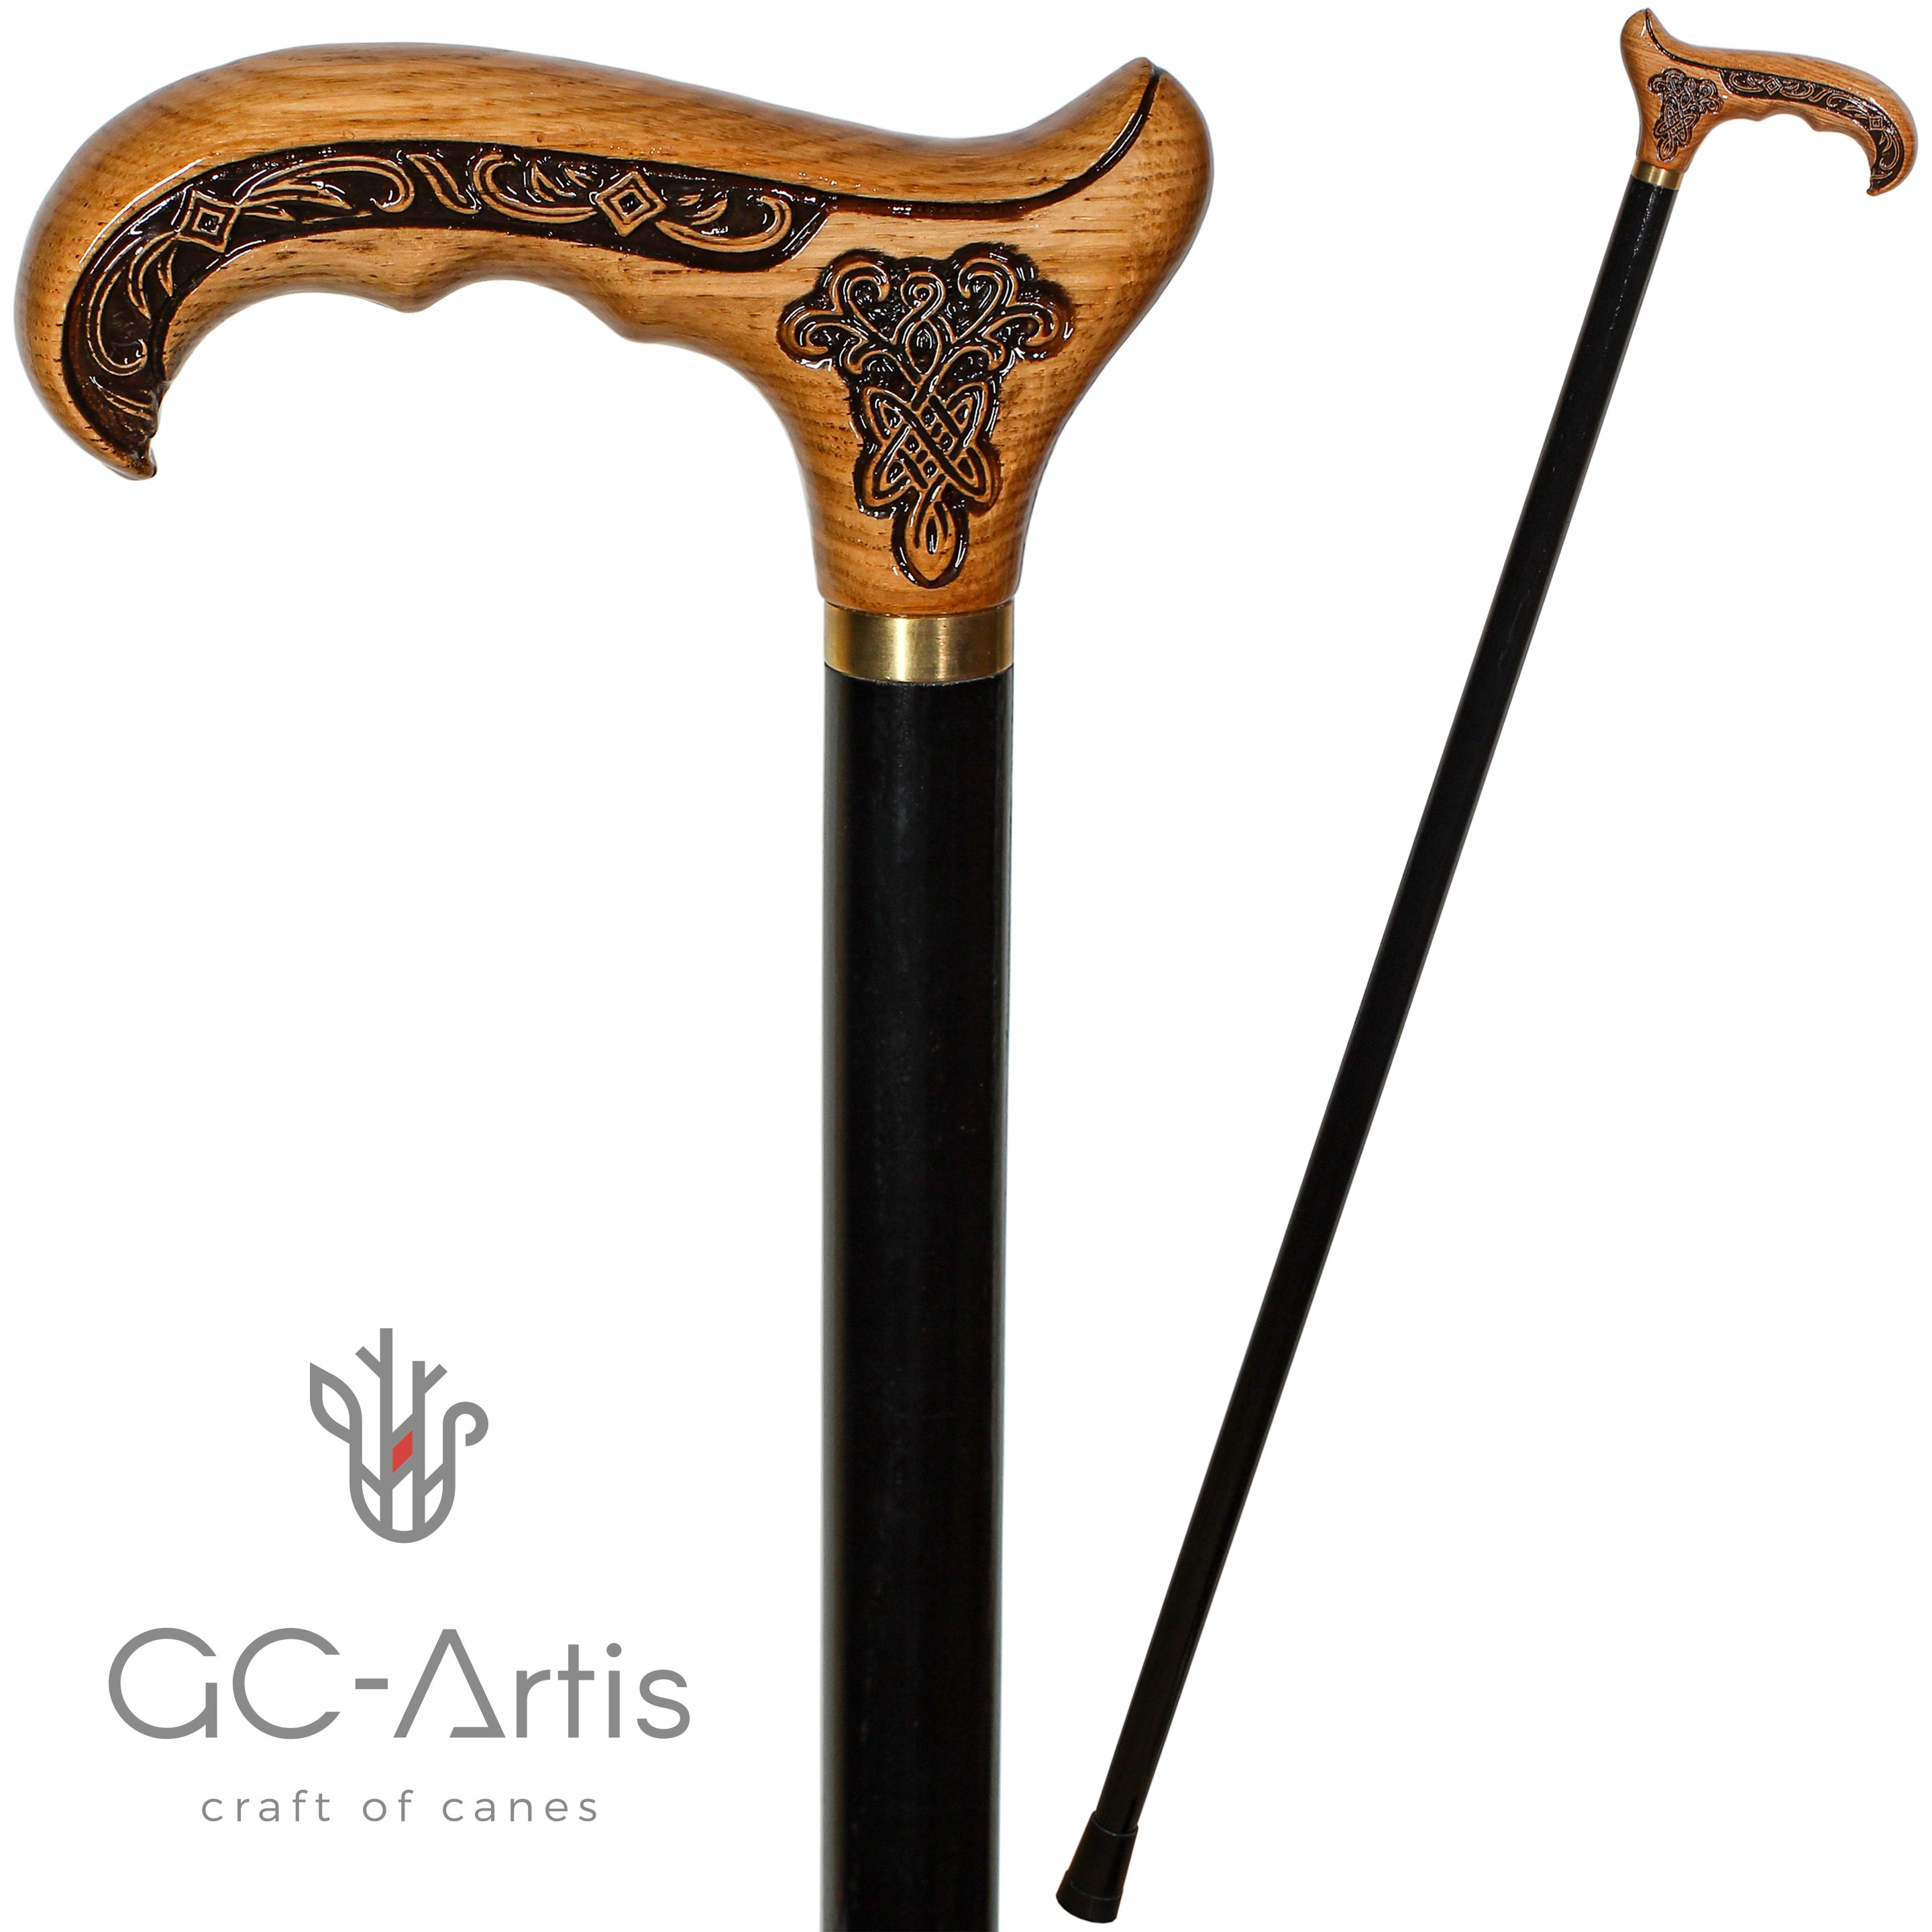 Celtic Bear Handle (#560127) for Asterom Walking Cane